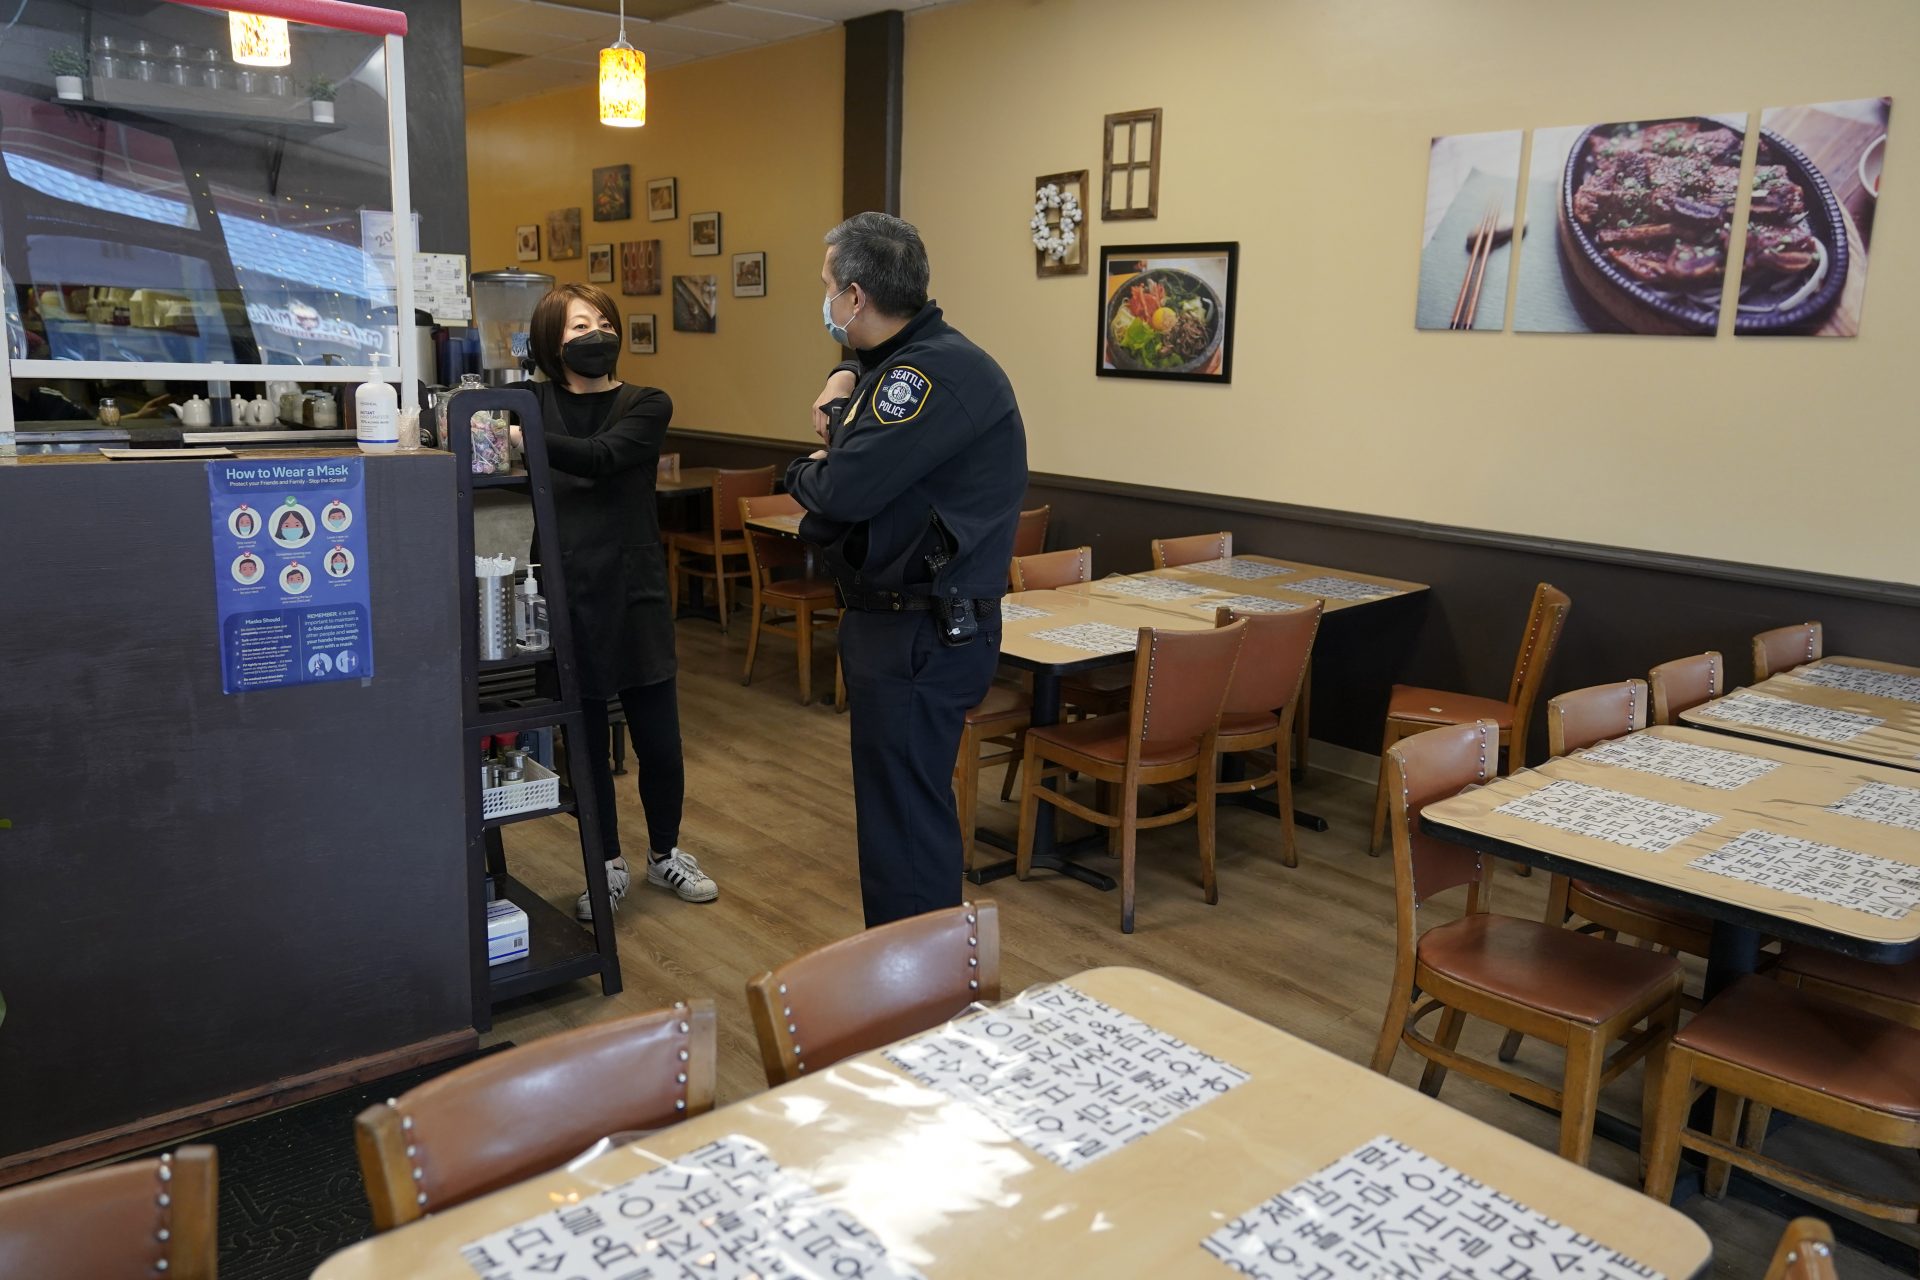 Steve Hirjak, right, a Seattle Assistant Chief of Police and head of SPD's Collaborative Policing Bureau, talks with Ji Young Shim, left, owner of the Seoul Tofu House and Korean BBQ restaurant in Seattle's Chinatown-International District Thursday, March 18, 2021, during a foot patrol.